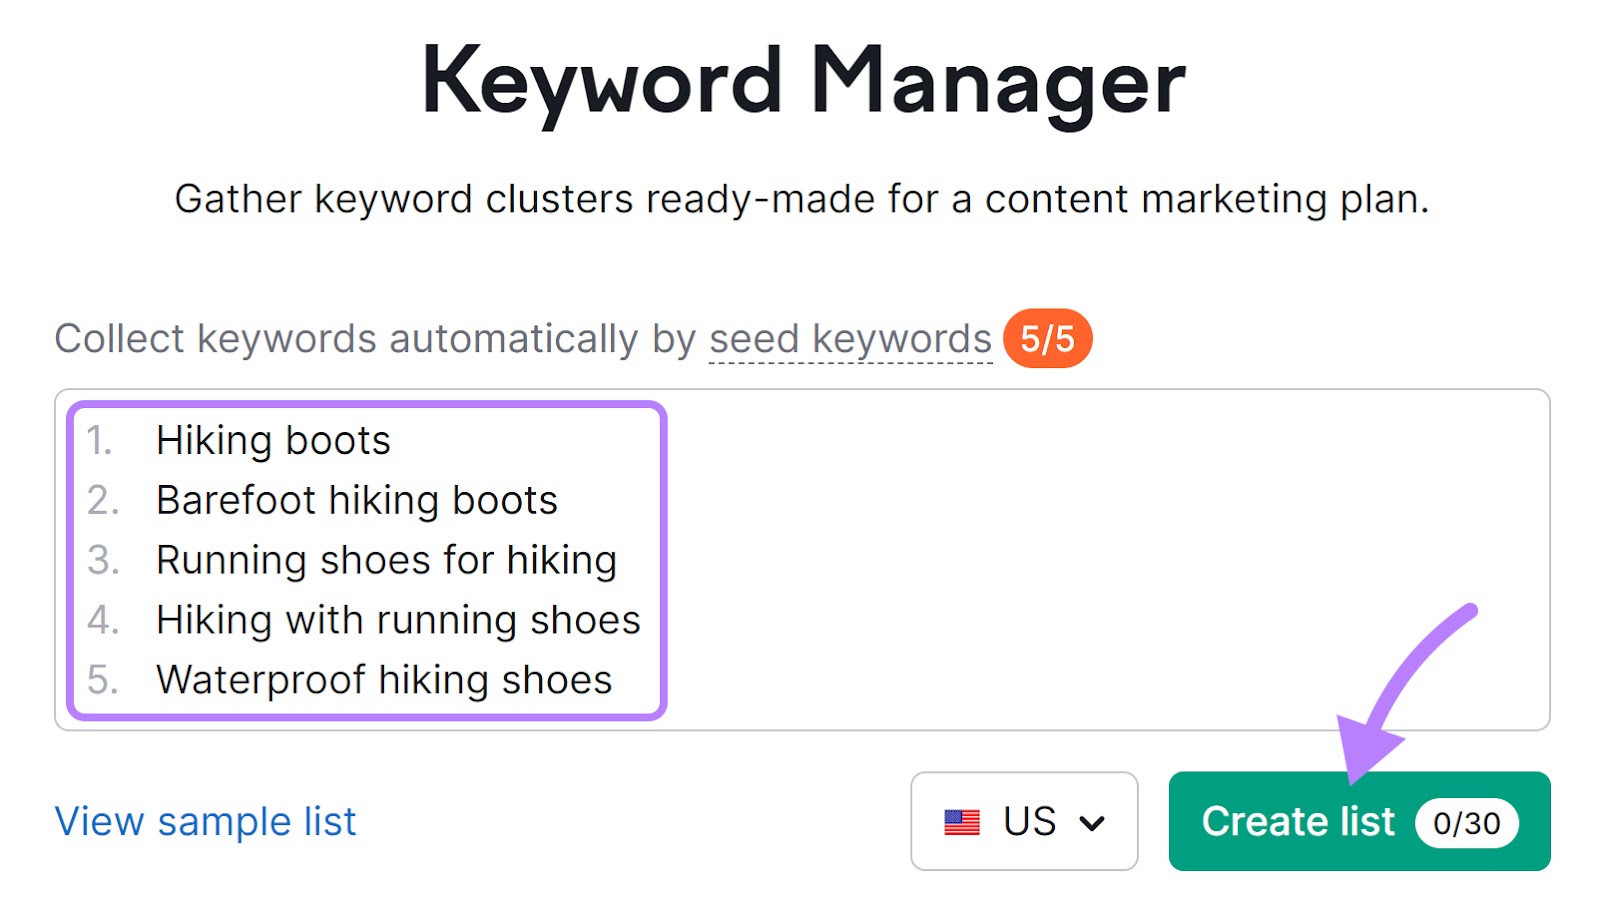 hiking boots, barefoot hiking boots, running shoes for hiking, hiking with running shoes, and waterproof hiking shoes entered into the Keyword Manager tool